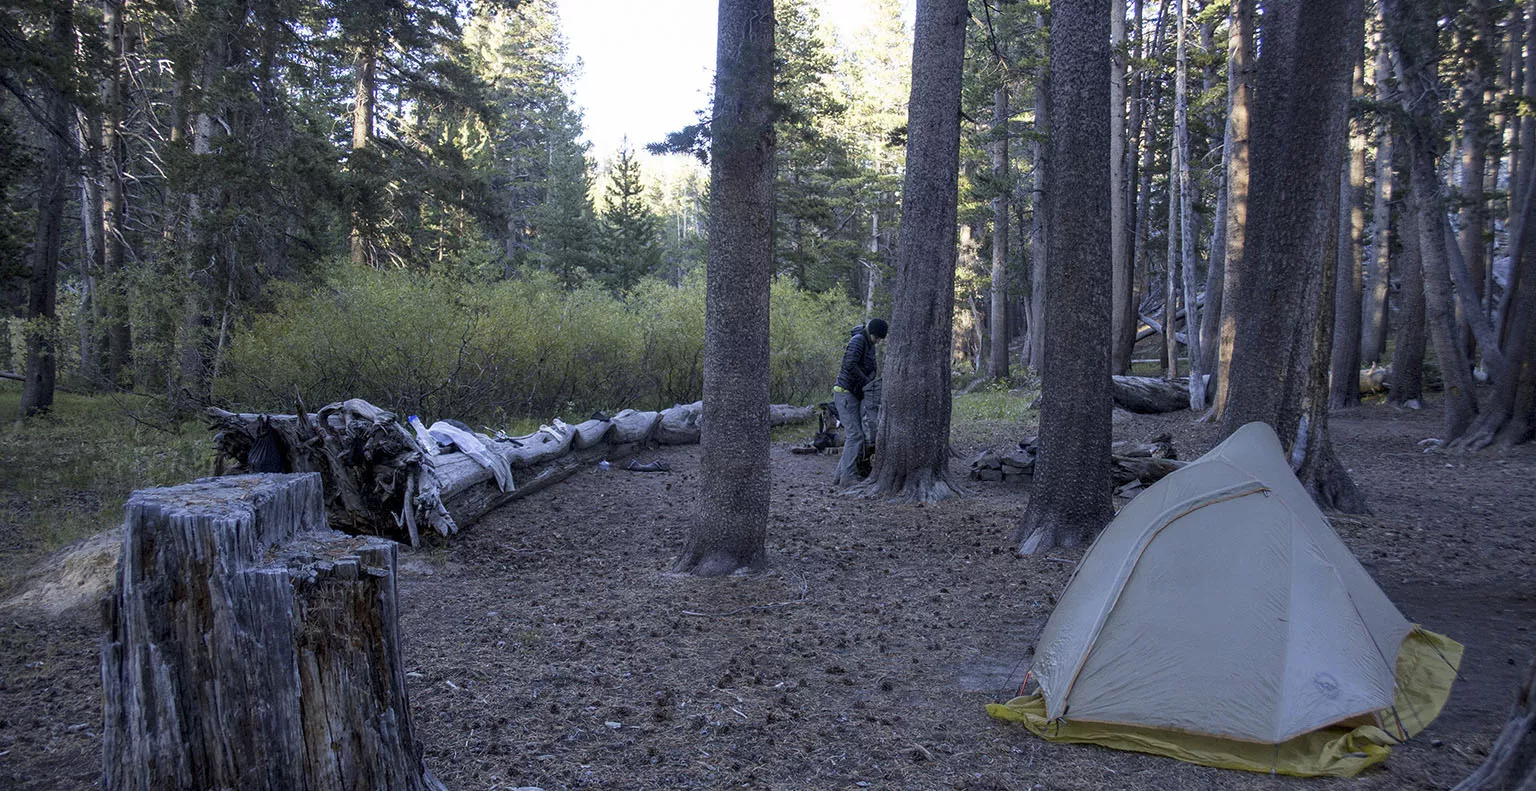 Our campsite in the forest on the bank of Rush Creek